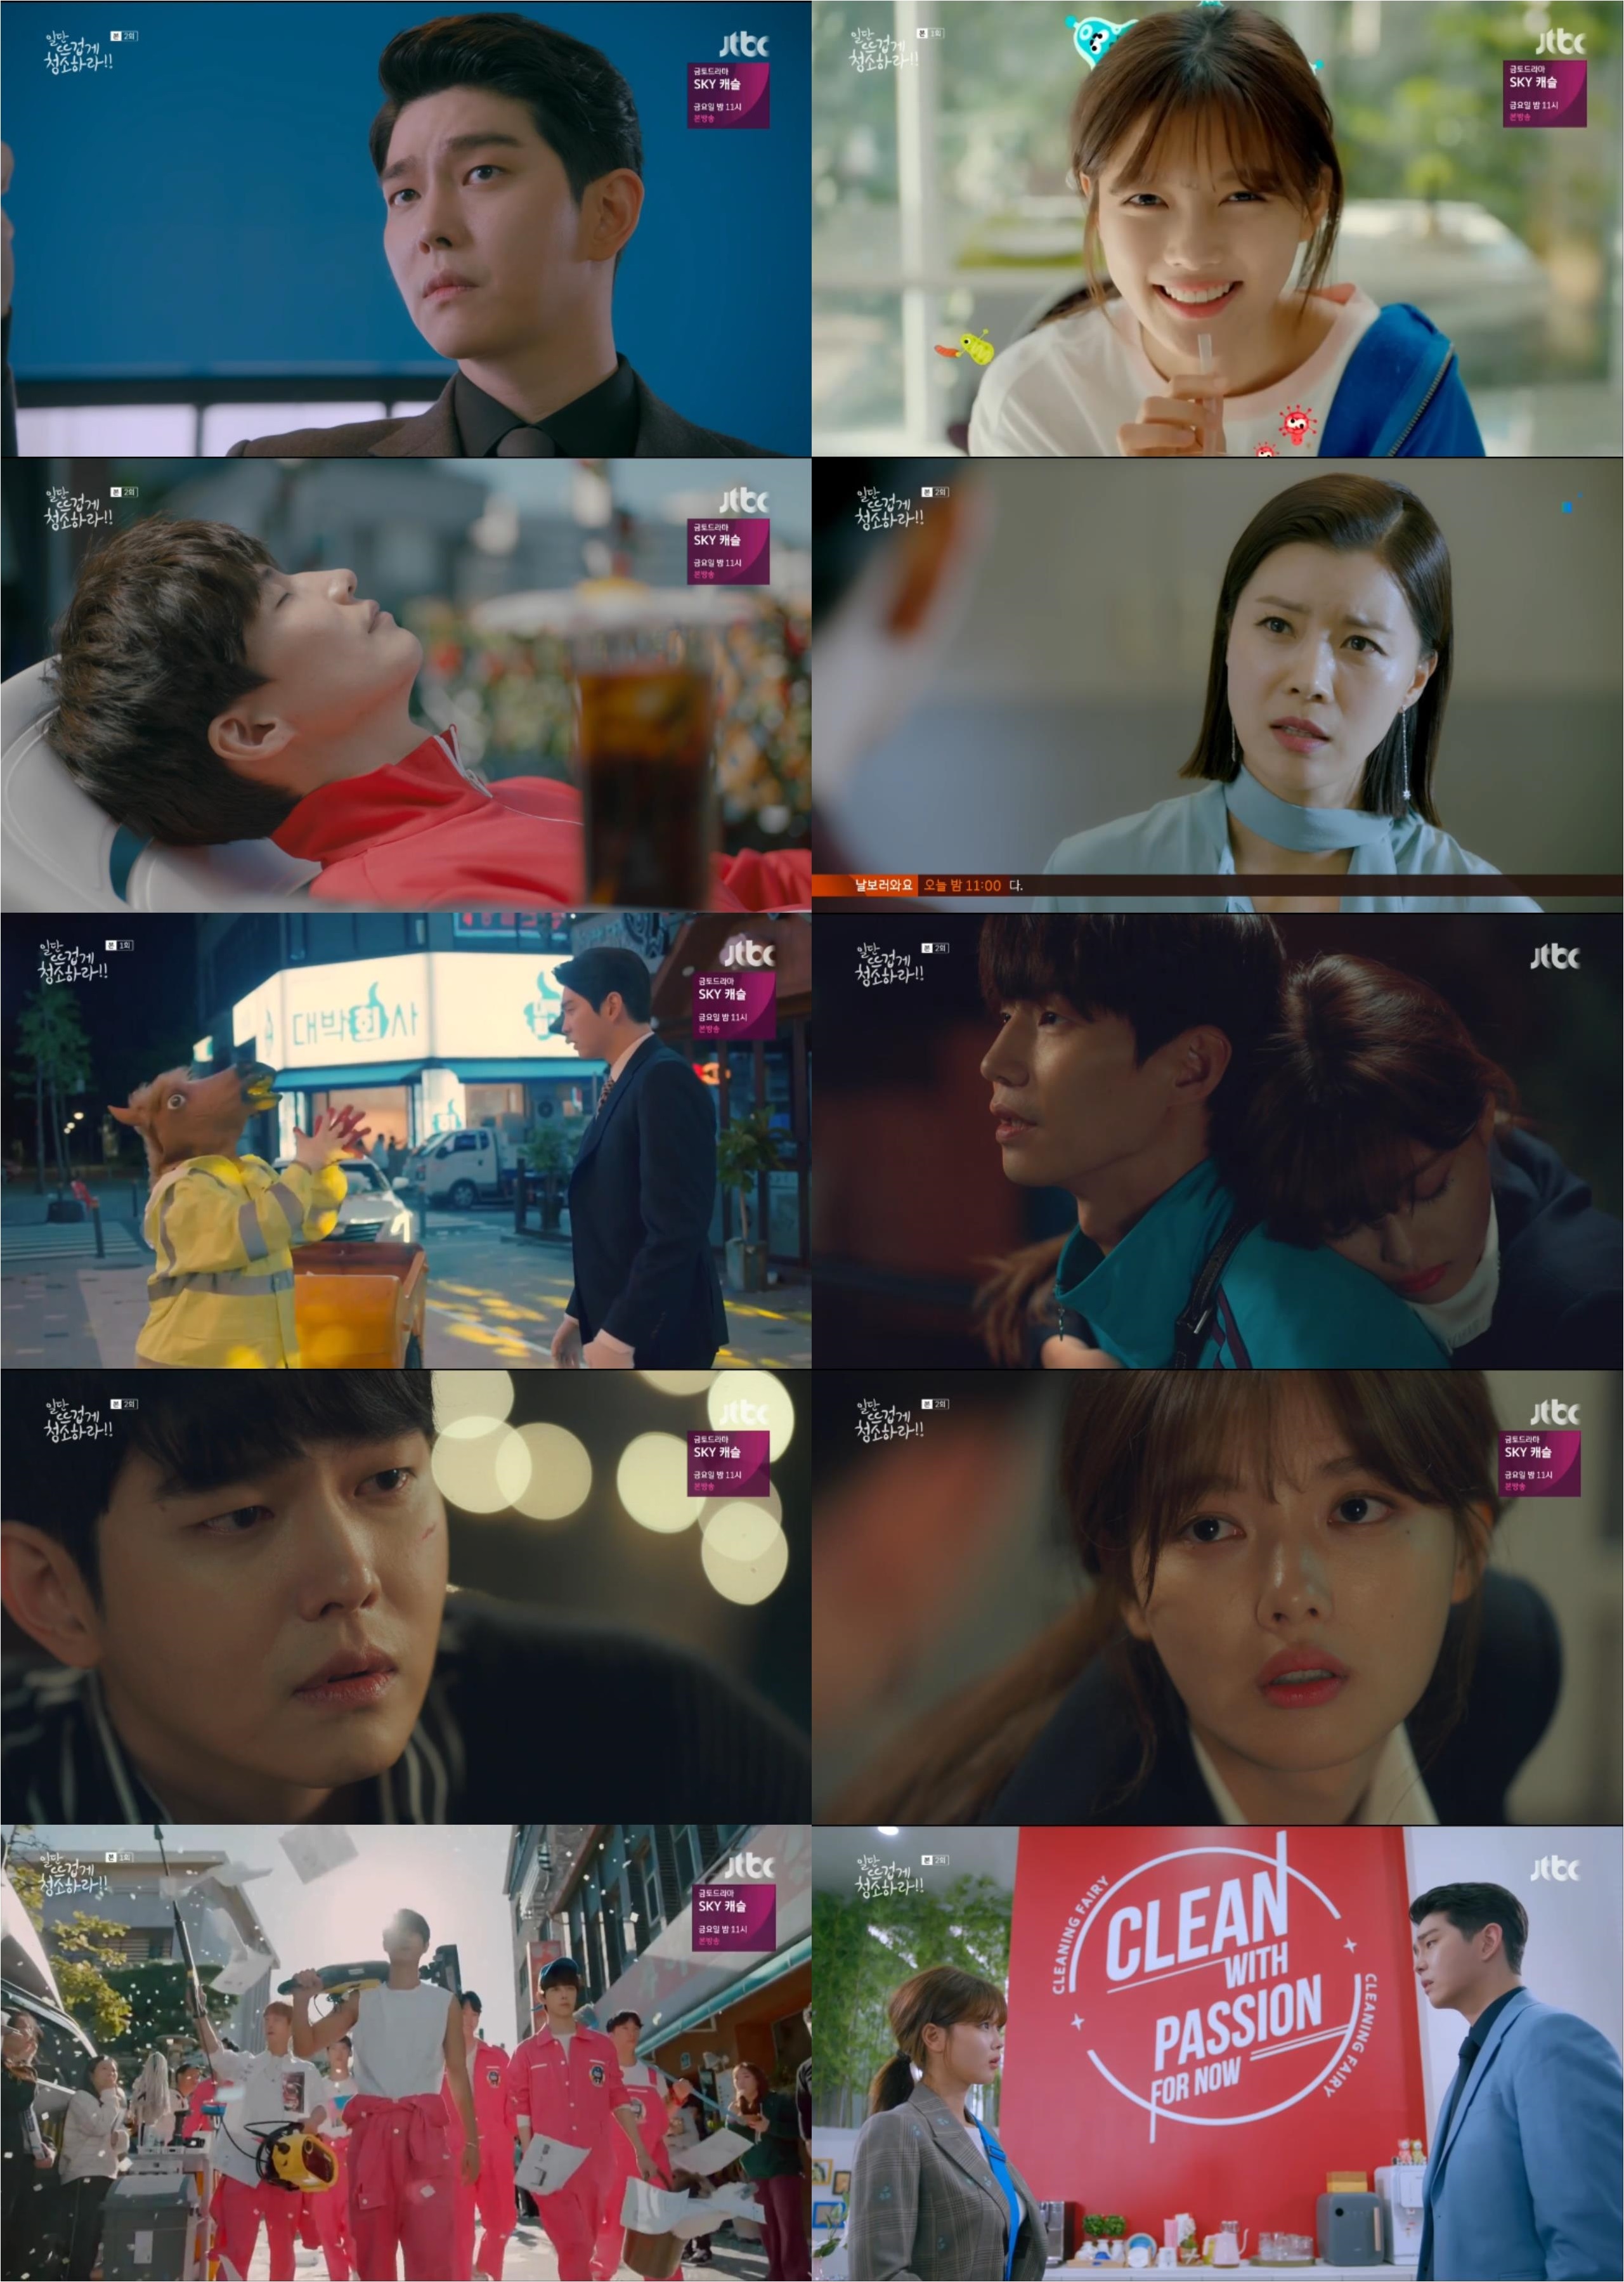 It was hot from the beginning. The once-hot clean, which melted the excitement and empathy in a pleasant smile, drew an explosive response in two episodes of the broadcast, announcing the birth of a differentiated healing roco.JTBCs Drama: Clean Up Once Hot (director Noh Jong-chan, playwright Han Hee-jung, production Drama House, and Oh Hyung-jae) is hot.The differentiated adaptation that reflects reality in the popular webtoon original of the same name, and the performances of the tight actors including Yoon Kyun-sang, Kim Yoo-jung, and Song Jae-rim became perfect harmony and became a new leader in the drama.Explosive reactions are pouring through various portal sites and SNS, such as taking control of real-time search terms immediately after broadcasting.So, I tried to find out the secret of popularity of the charm that once made sure of the expectation, Clean Up Hot, which attracted viewers as well as original fans at once.# Rocoking ascension Yoon Kyun-sang X tore fairy Kim Yoo-jung, extraordinary transform shinesThe breath of Yoon Kyun-sang and Kim Yoo-jung, who had hoped for it, was indeed a shame.The transformation of Kim Yoo-jung, who perfected the first romantic comedy after his debut, and the perfect transformation of Kim Yoo-jung, who perfected Gil Osol, created synergies with both laughter and excitement.Jang Seon-sung and Gil Osol, who revived the charm of the original character and added newness to their own texture, succeeded in capturing not only the original fans but also the viewers.Yoon Kyun-sang lovingly digested the sensitive Fearless Fear Jang Seon-gyeol and laughed, and Kim Yoo-jung, wearing Gilosol, a kojil, secured sympathy by melting the reality of youth in a pleasant character.The first meeting scene of the first black history of the Cheongpo woman (the woman who cleaned up), Gil Osol, proved a hot response with a 5.3% audience rating at the moment.Osol entered the Cleaning Fairy run by the first, raising expectations about what kind of pushing and wiping romance the two men and women of the upper drama, which started with black history, will draw.# Original Point Revitalized and Youth Reality Added!The irritating point, which comes from the exciting setting of the perfect indeterminate male precedence with the blemishes and the meeting of the Cheongpo girl osol, brought fresh fun to the differentiated adaptation that added to the reality of youth while making good use of it.The life of Osol, who runs beyond the hurdles of life and runs toward the destination of employment, led to the empathy of youth.Especially, the drunken truth that embraced and complained about the pen that I used to prepare for employment stimulated many tears of youth.The NEW Character Choi (Song Jae-rim), who is not in the original work, comforted the osole with a mysterious presence and helped the healing energy.Gil-hae Kim and Gil-Odol (Lee Do-hyun) also caught both laughter and emotion, adding to the familys sense of reality.# Squeezy full smoke master X popular new hard carry breathingActors smoke, which filled the drama with no doubt, was stable and centered, bringing pleasant energy and enriching.From perfect girl crush to reversal charm, Kwon secretary Yoo Sun, who kept the side of the prequel, Won-hae Kim, who added a sense of reality to and from the monochrome, and Ahn Seok-hwan, Son Byung-ho and Kim Hye-eun, who did not need to explain their presence in a certain color, amplified their immersion.Min Do-hee laughed with her best friend Chemi, and made her expect Kim Min-gyu, a clean-up fairy, who robbed her eyes with warm visuals and colorful charms, and a tit-for-tat bro-chemi, who was a student and a cha In-ha.Park Kyung-hye and Choi Yoo-song, who amplified Chois mystery, were also intense. The more they went through the meeting, the more they expected the performance of Manleb Actors.On the other hand, netizens said through various SNS and portal sites, I did not know Kim Yoo-jung was so good at acting, two actors who are so beautiful, handsome and doing, Especially, I fainted at the head of the horse. It was broadcast every Monday and Tuesday at 9:30 pm.iMBC  JTBC Screen Capture